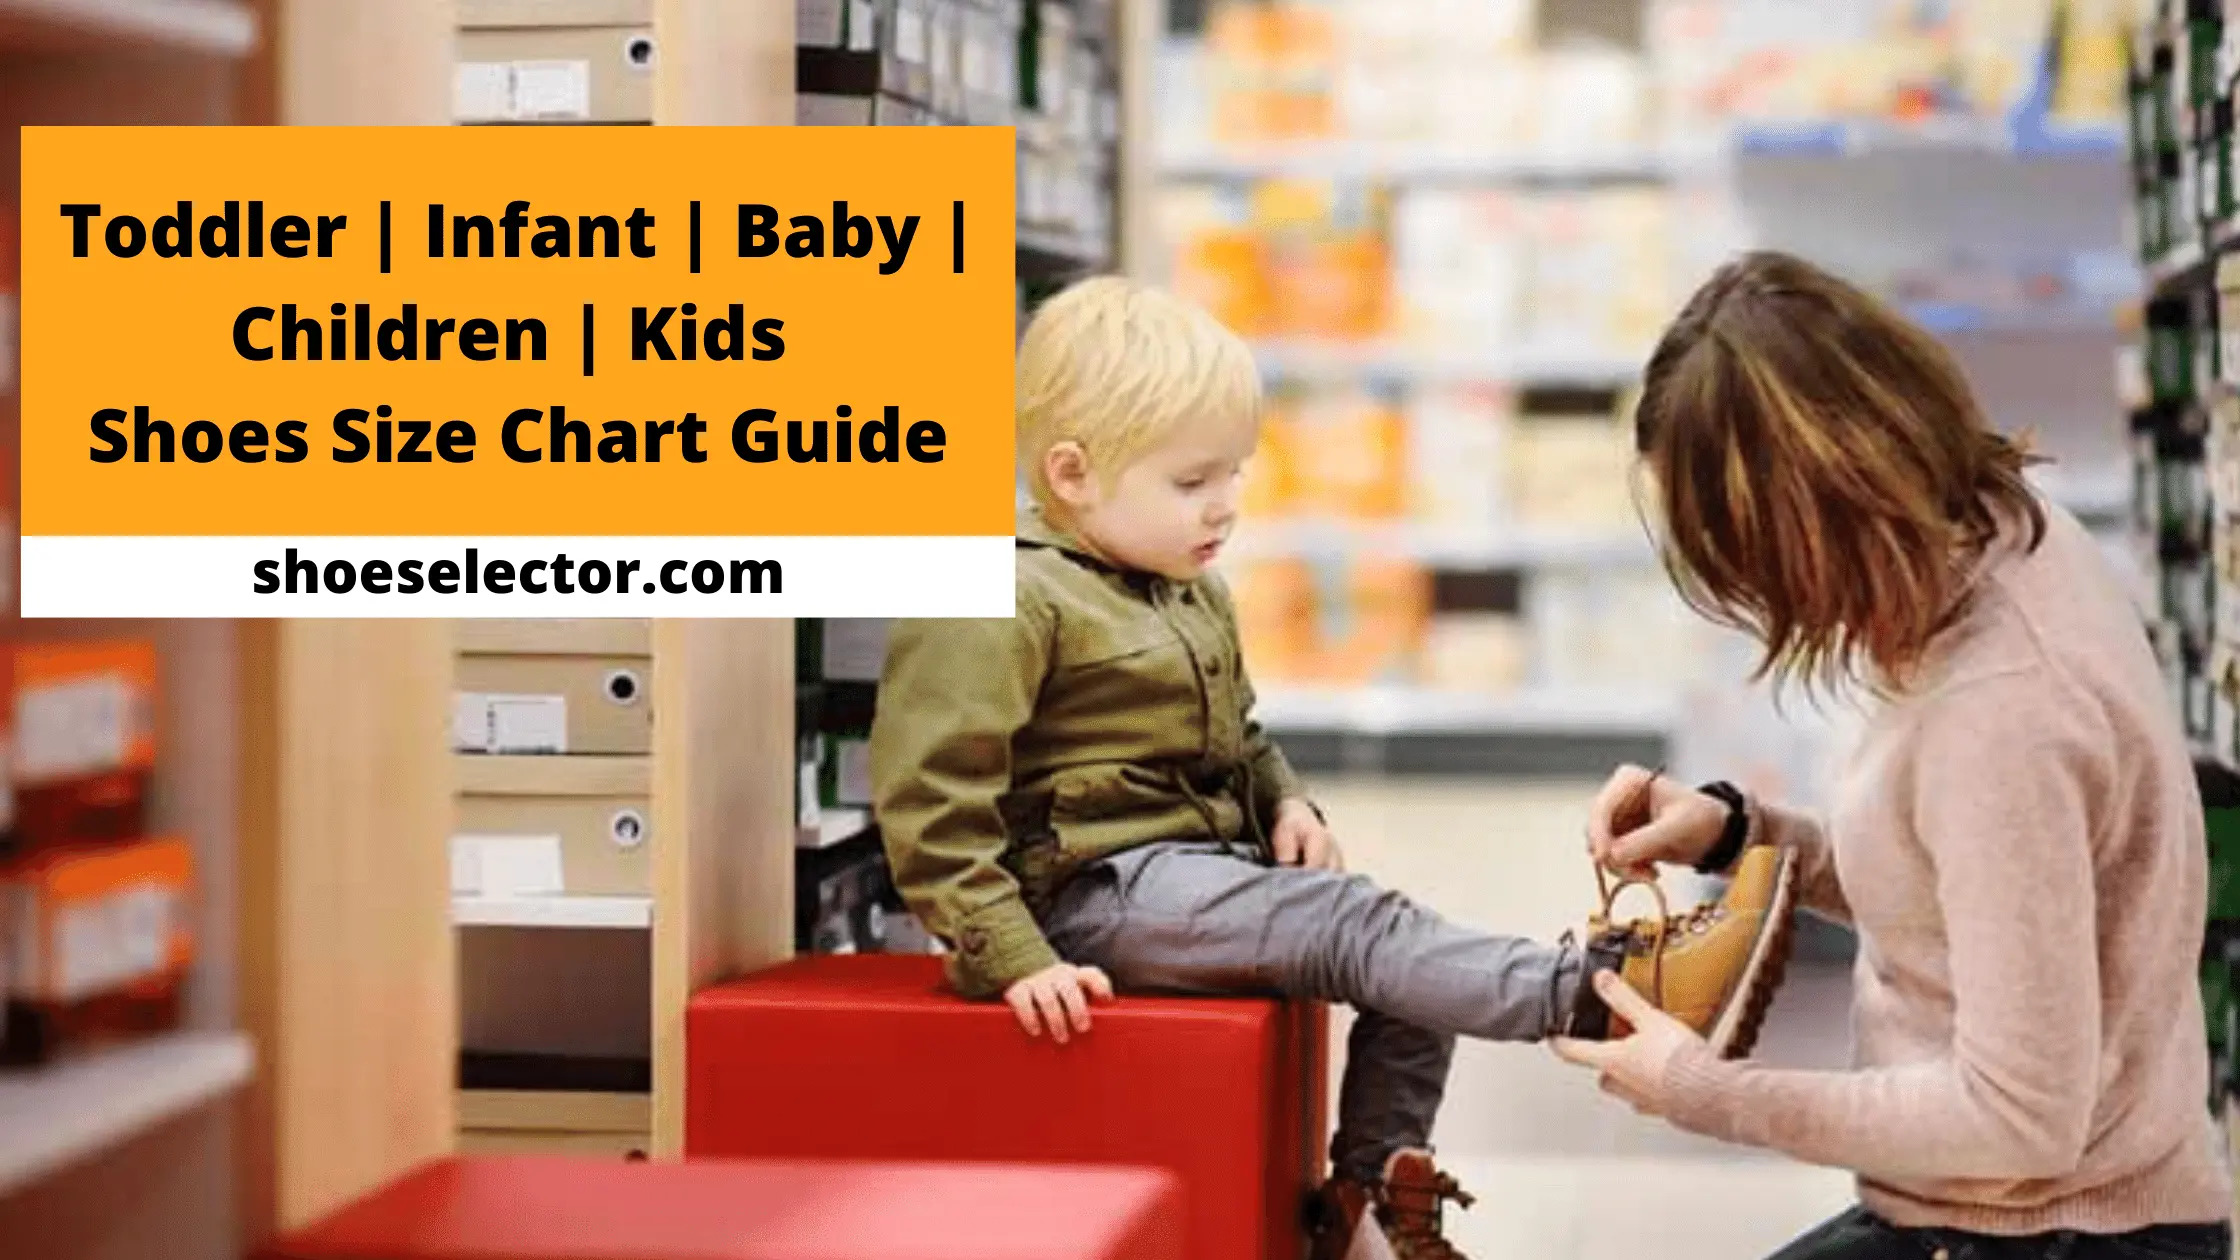 Toddler Infant Baby Children Kids Shoes Size Chart Guide